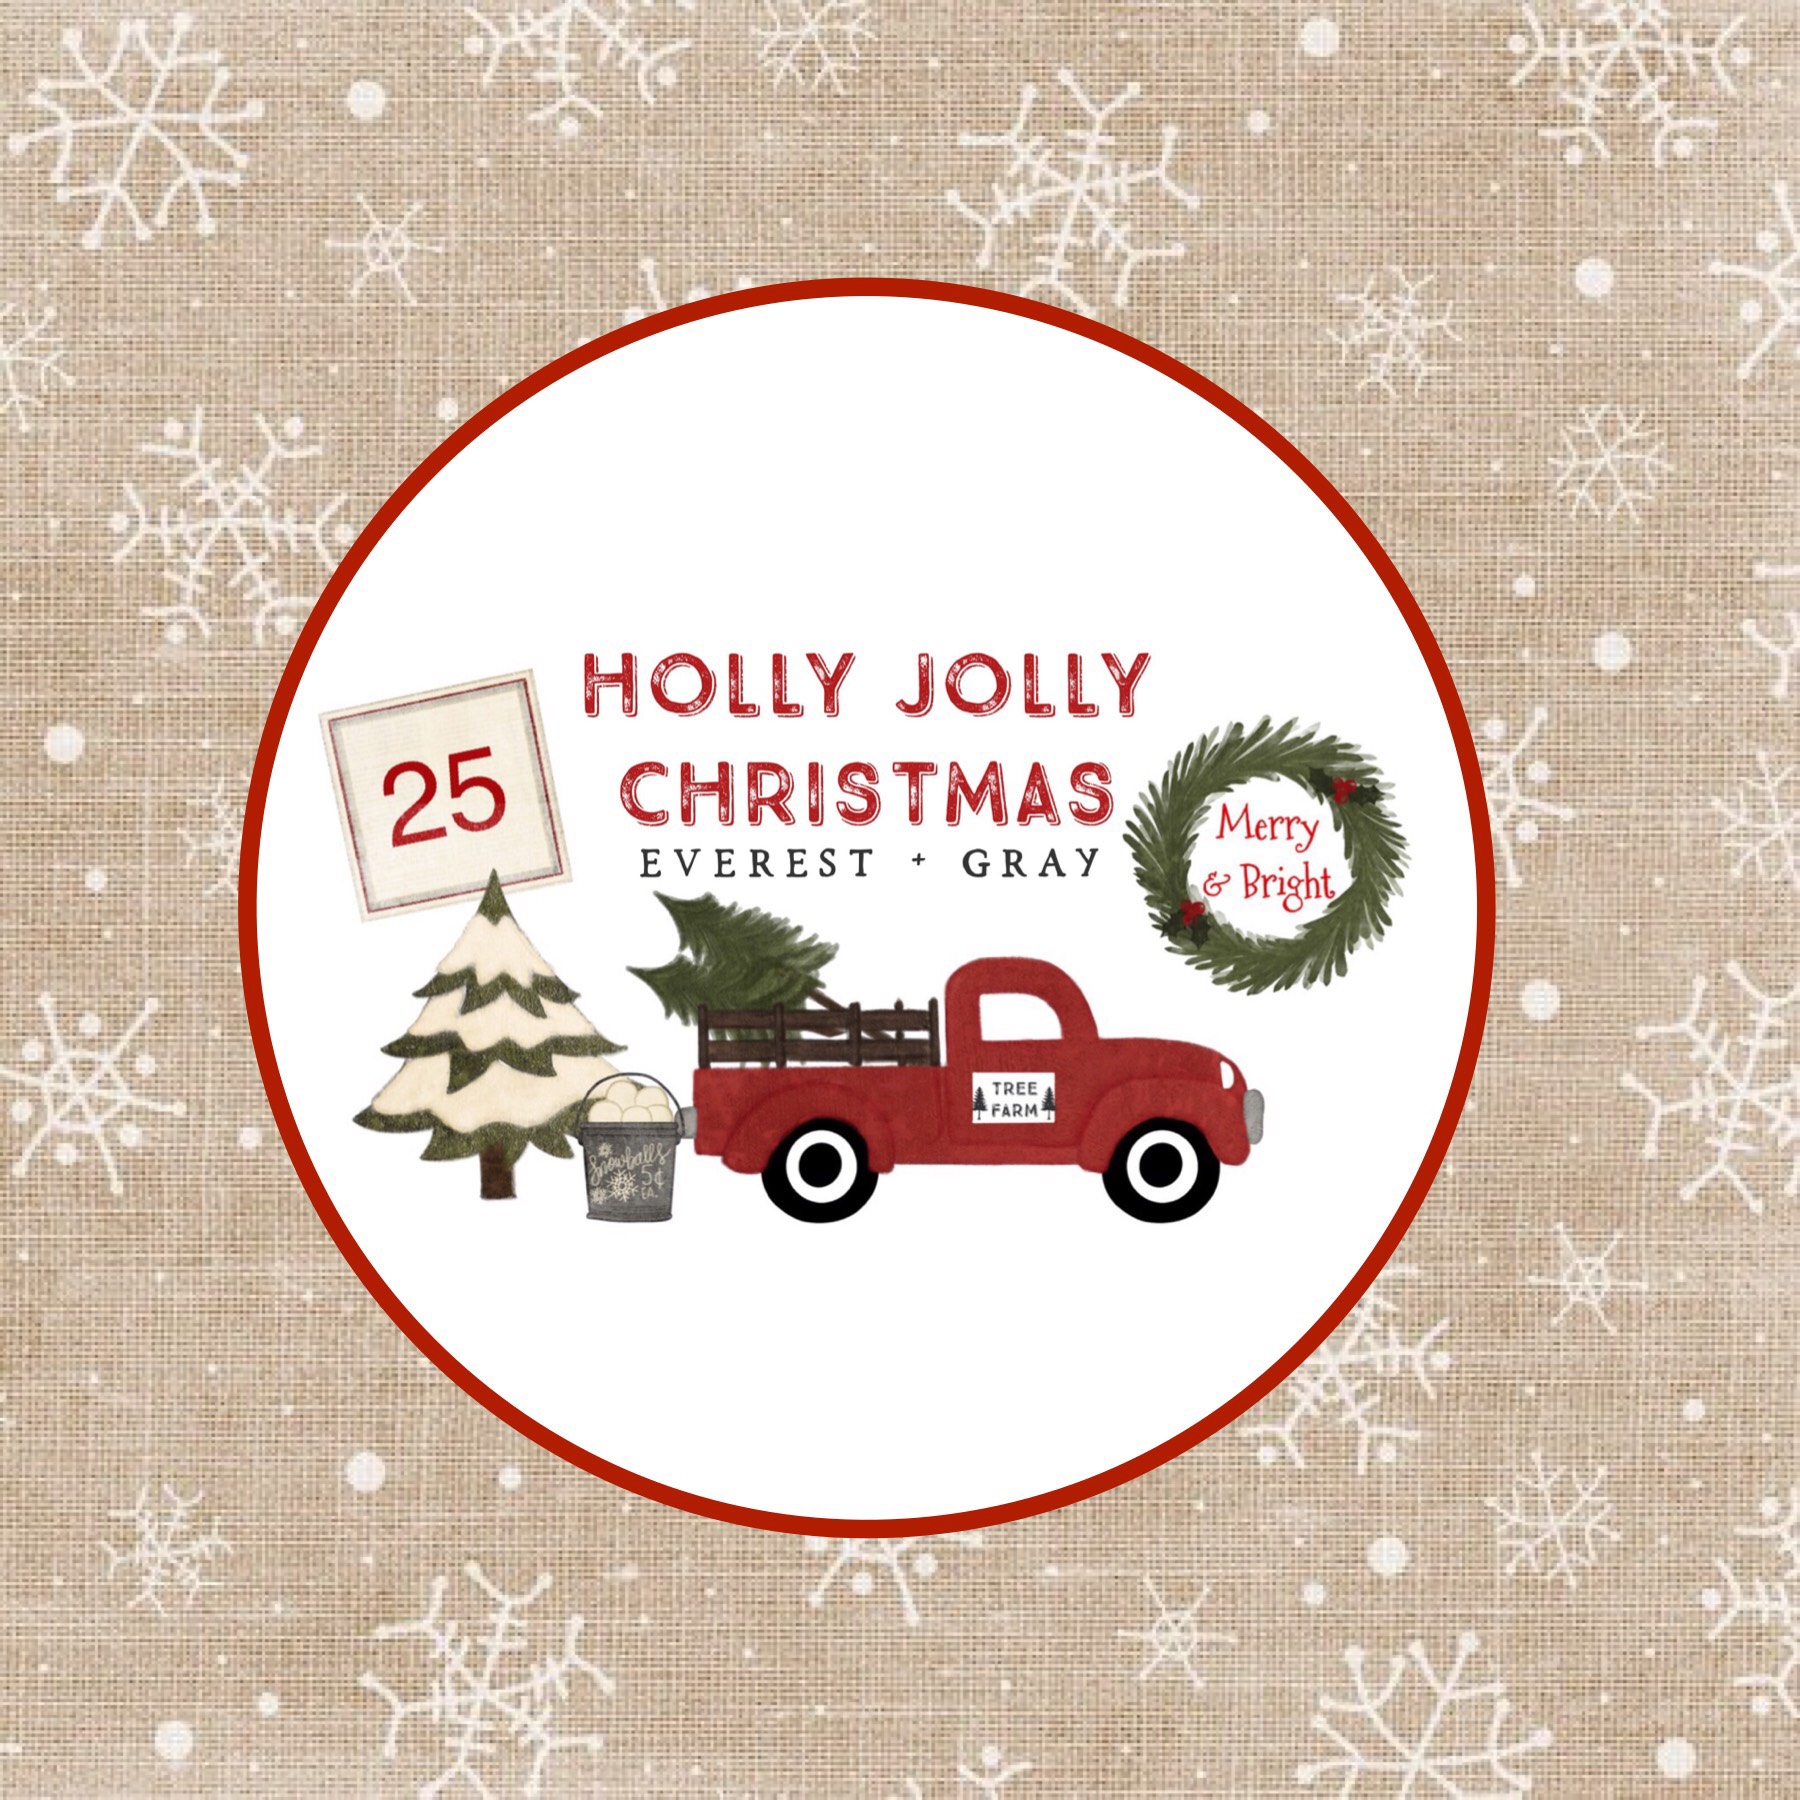 It’s coming!!!!!🌲Watch for THIS STICKER PACK!♥️ #HollyJollyChristmas